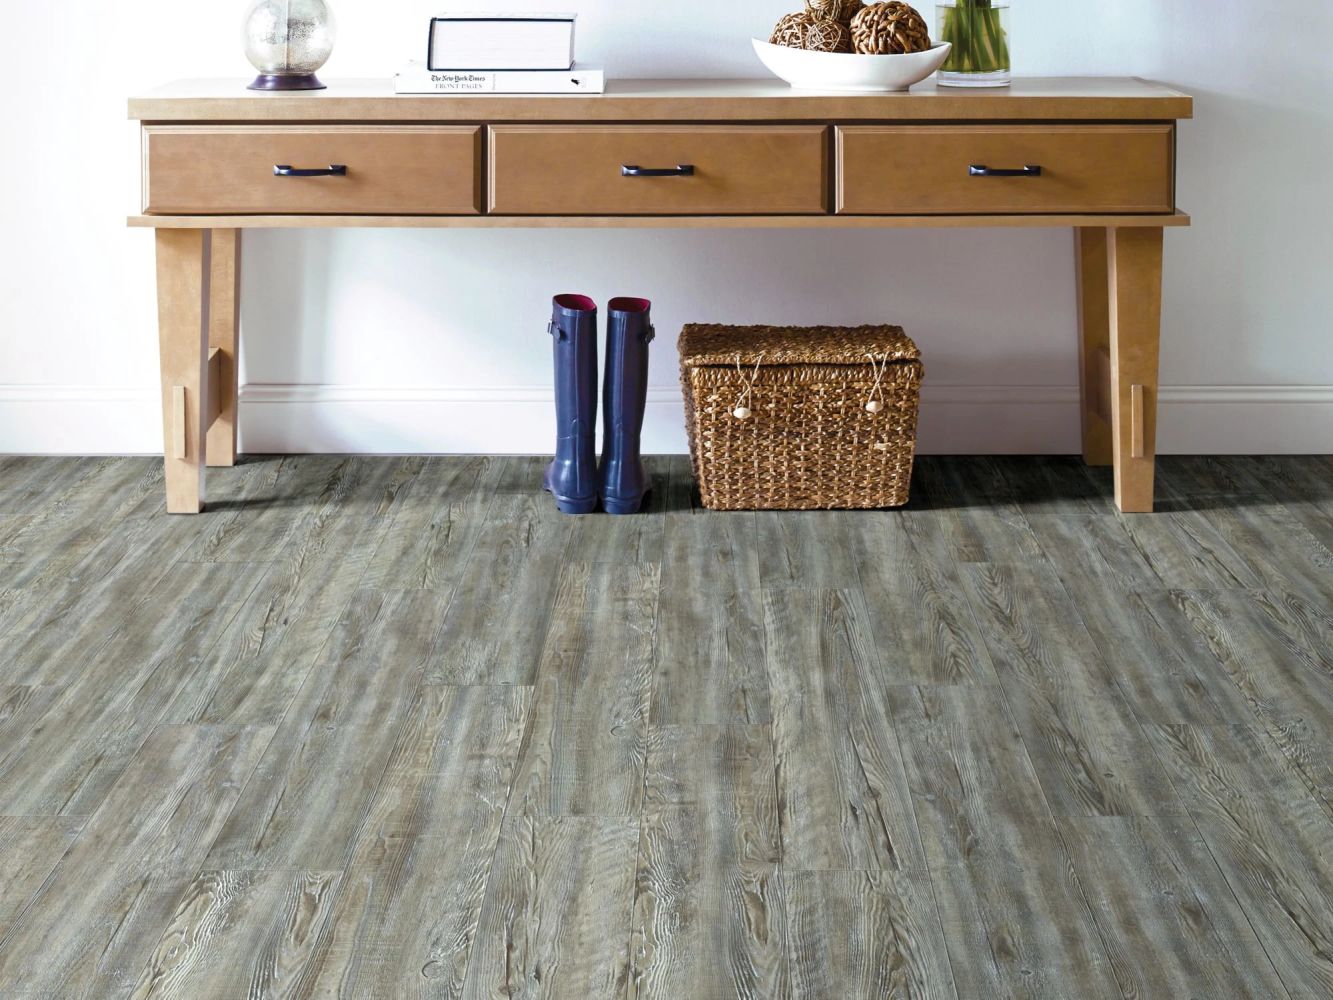 Shaw Floors Resilient Residential Impact Plus Weathered Barnboard 00400_2031V